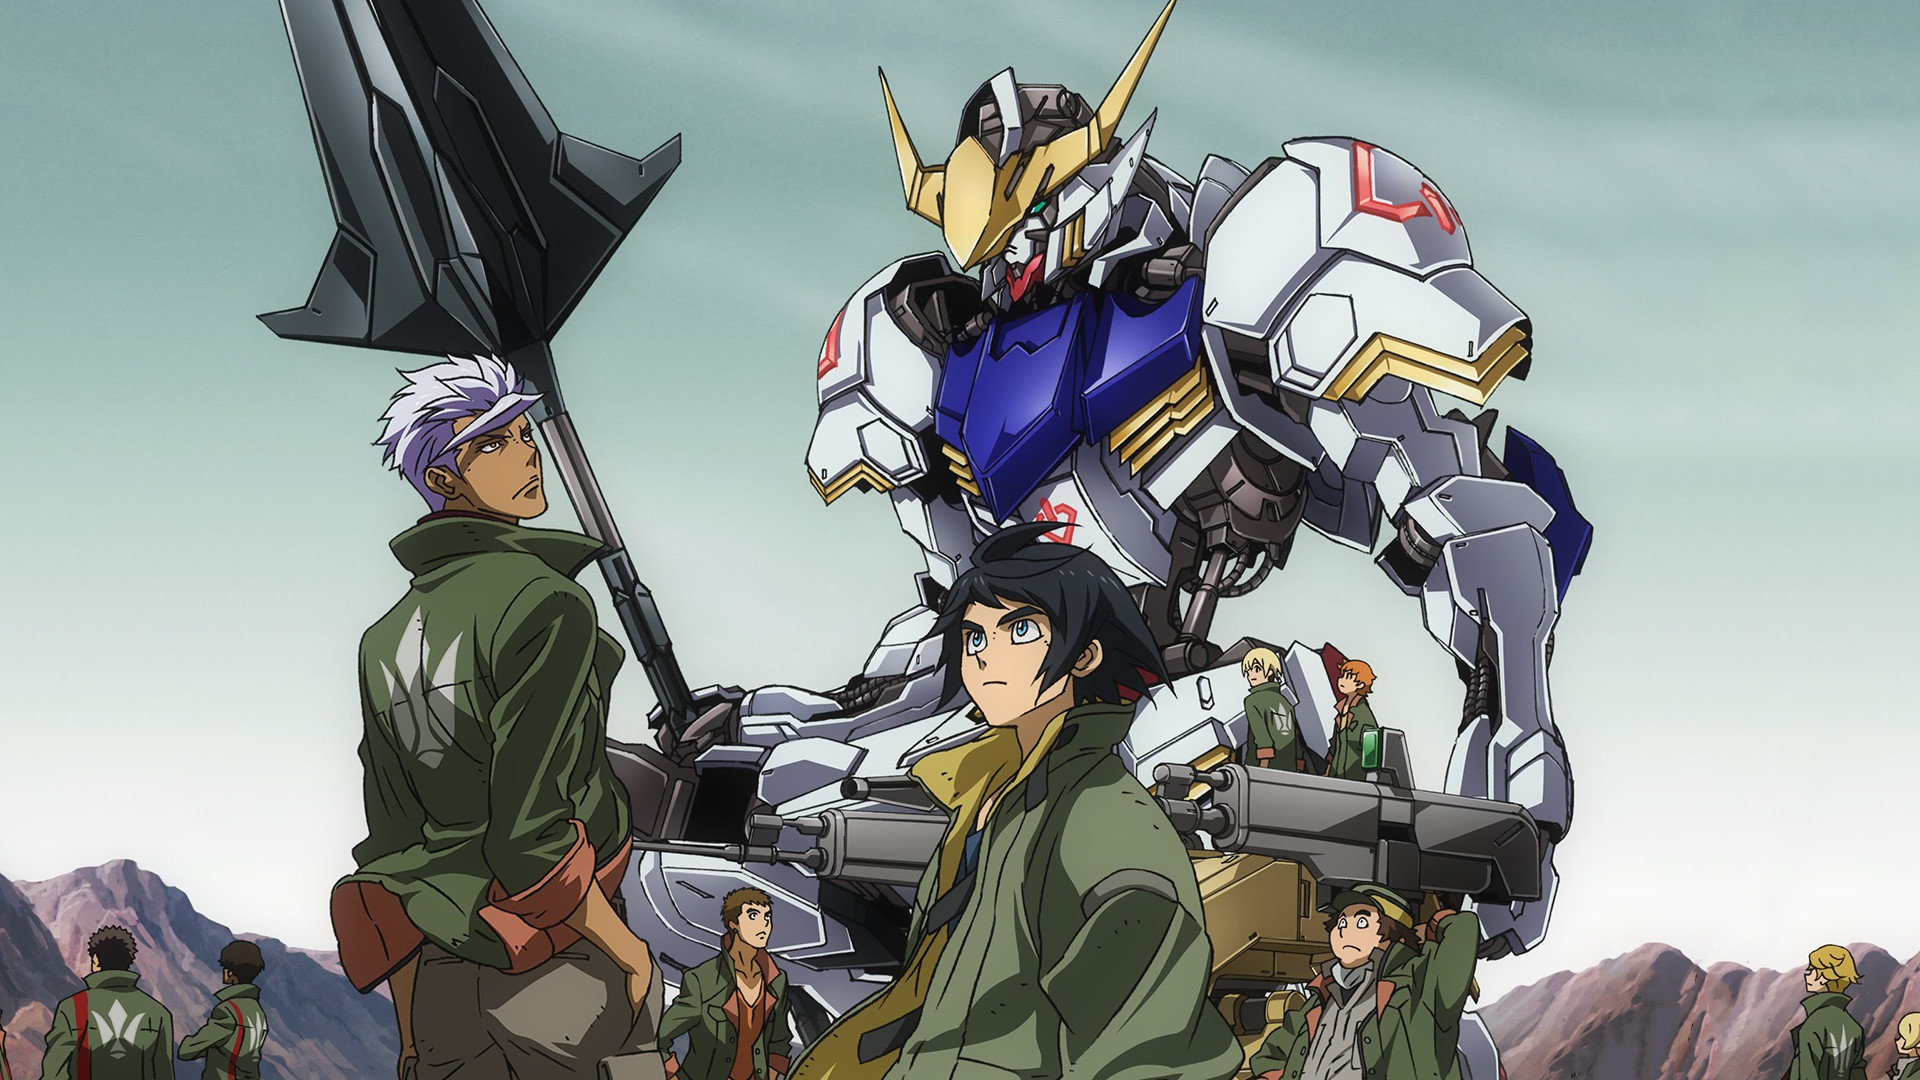 Best Mobile Suit Gundam: Iron-Blooded Orphans wallpaper ID:460268 for High Resolution full hd 1920x1080 computer